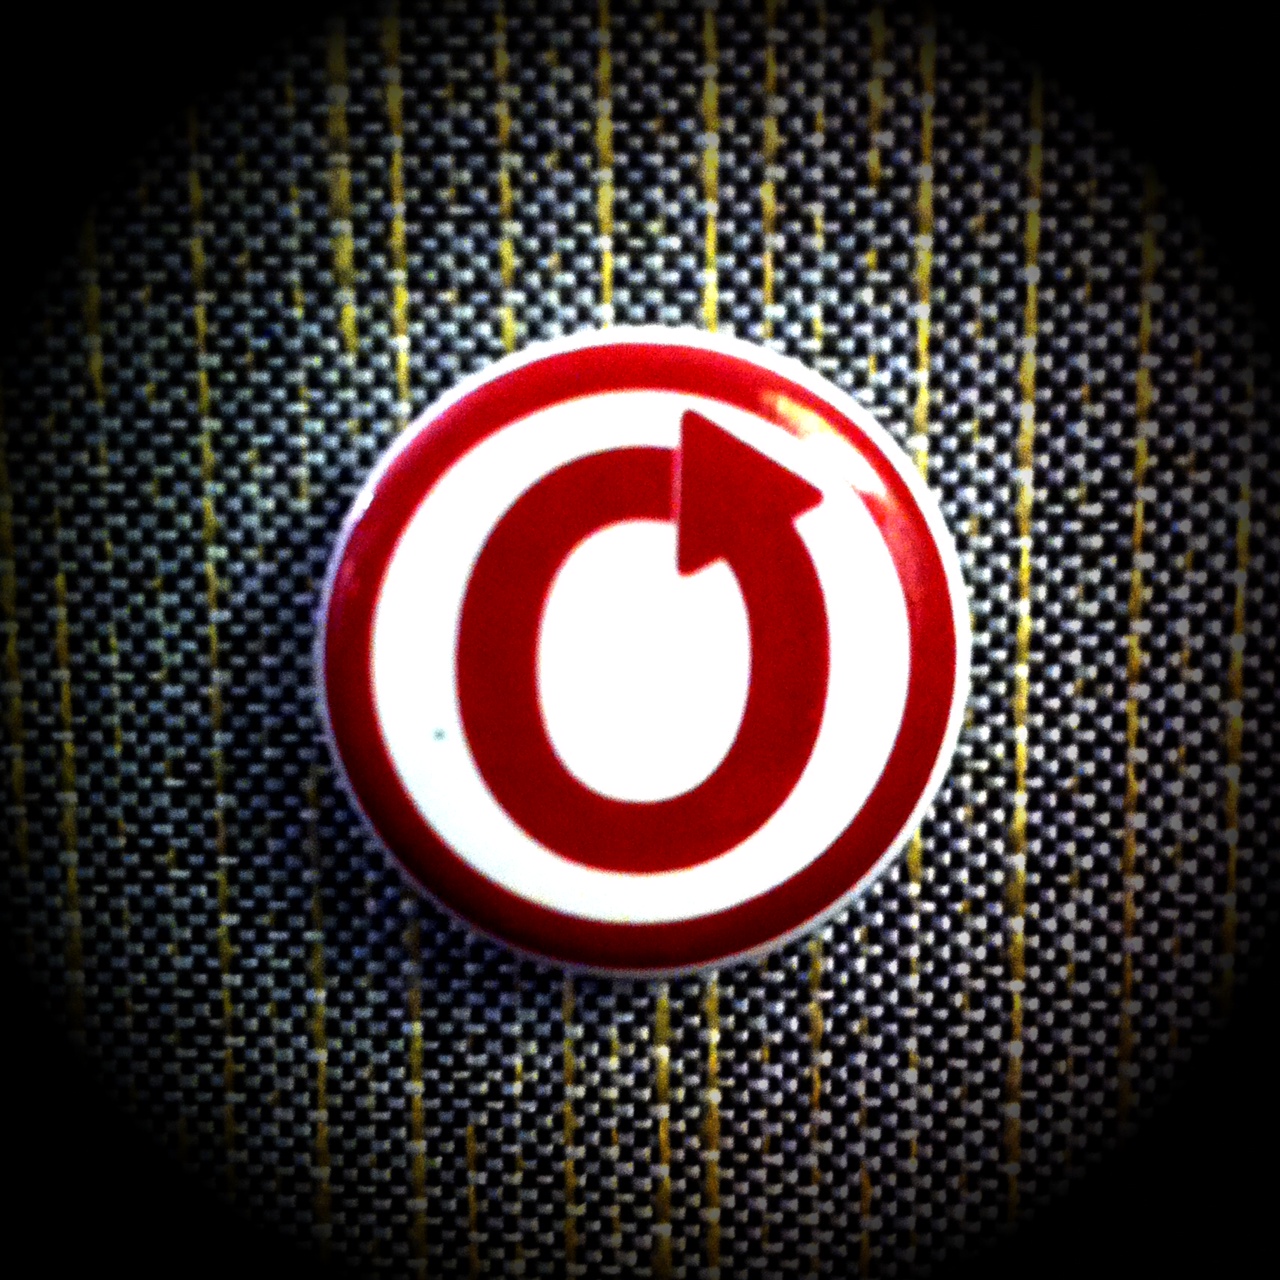 Color photo of OTW logo button against a cloth field.